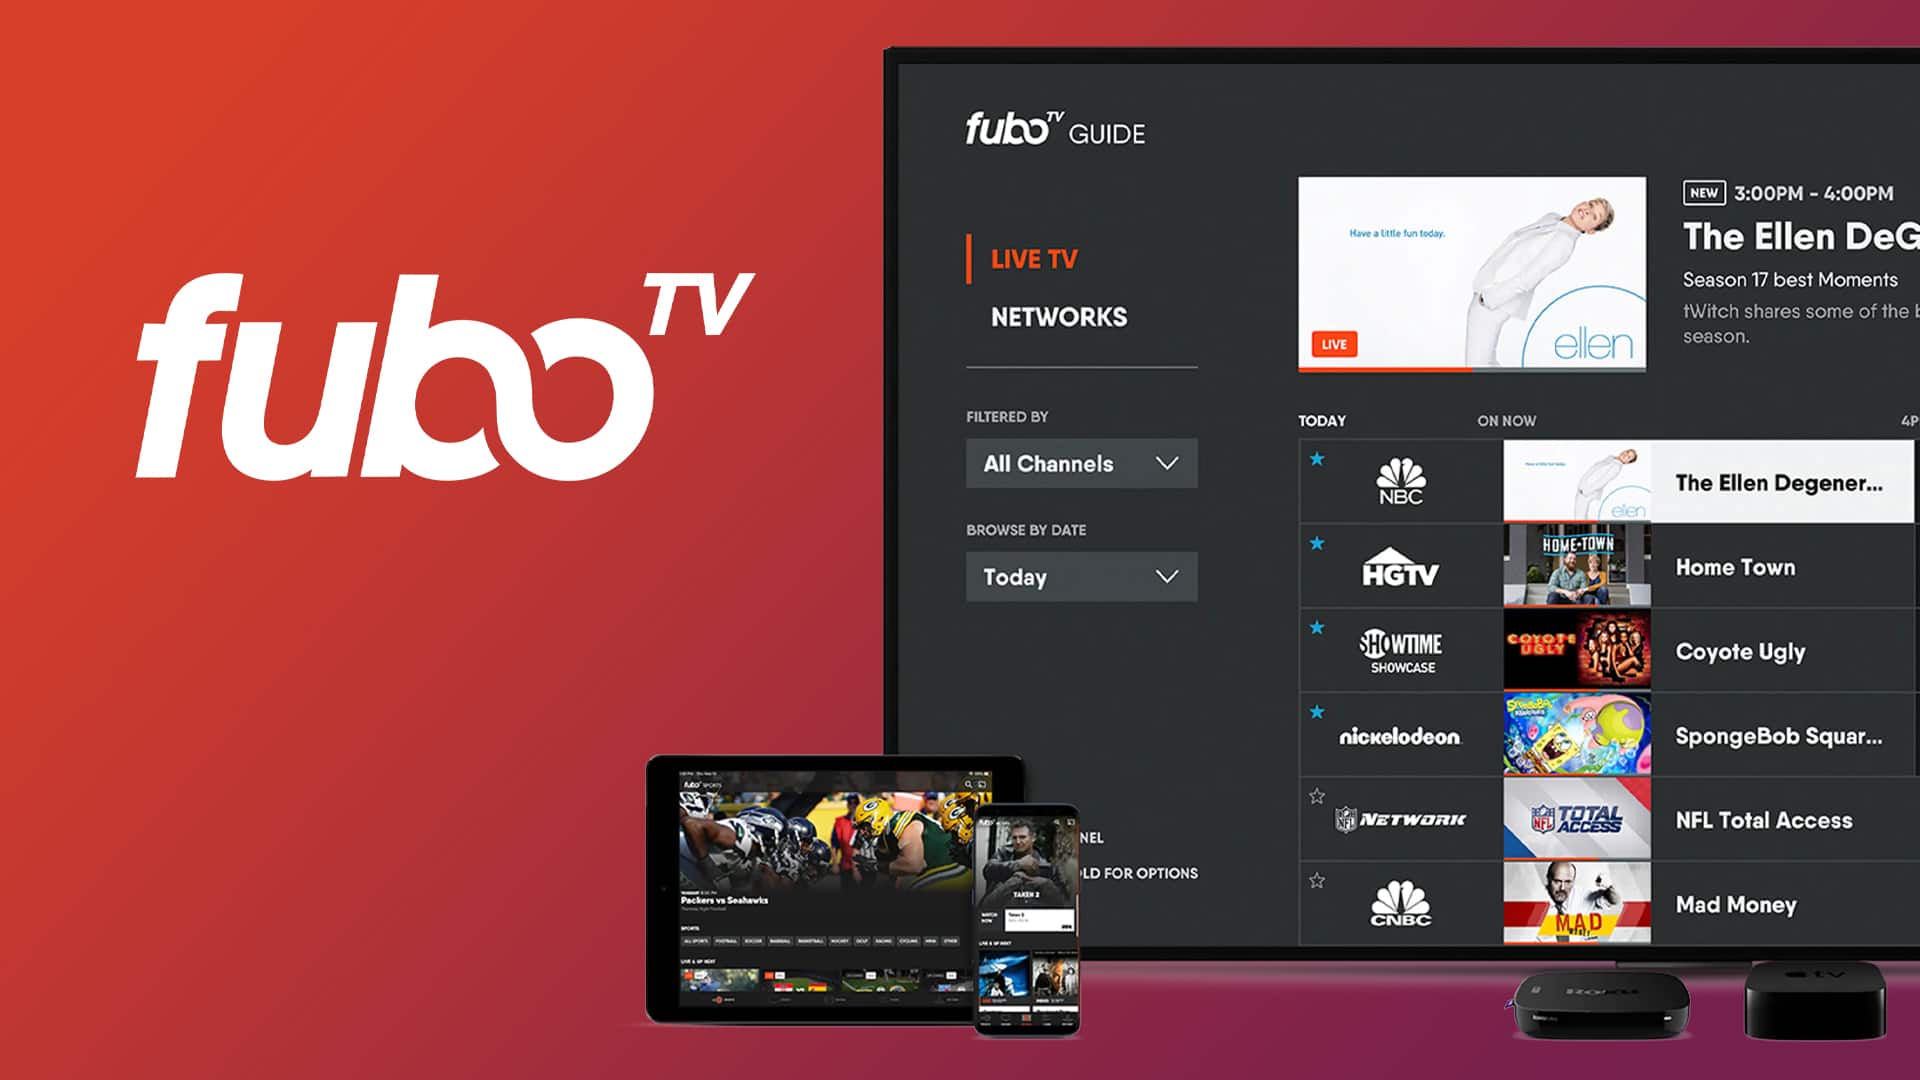 Weve Rounded Up the Best Deals on fuboTV